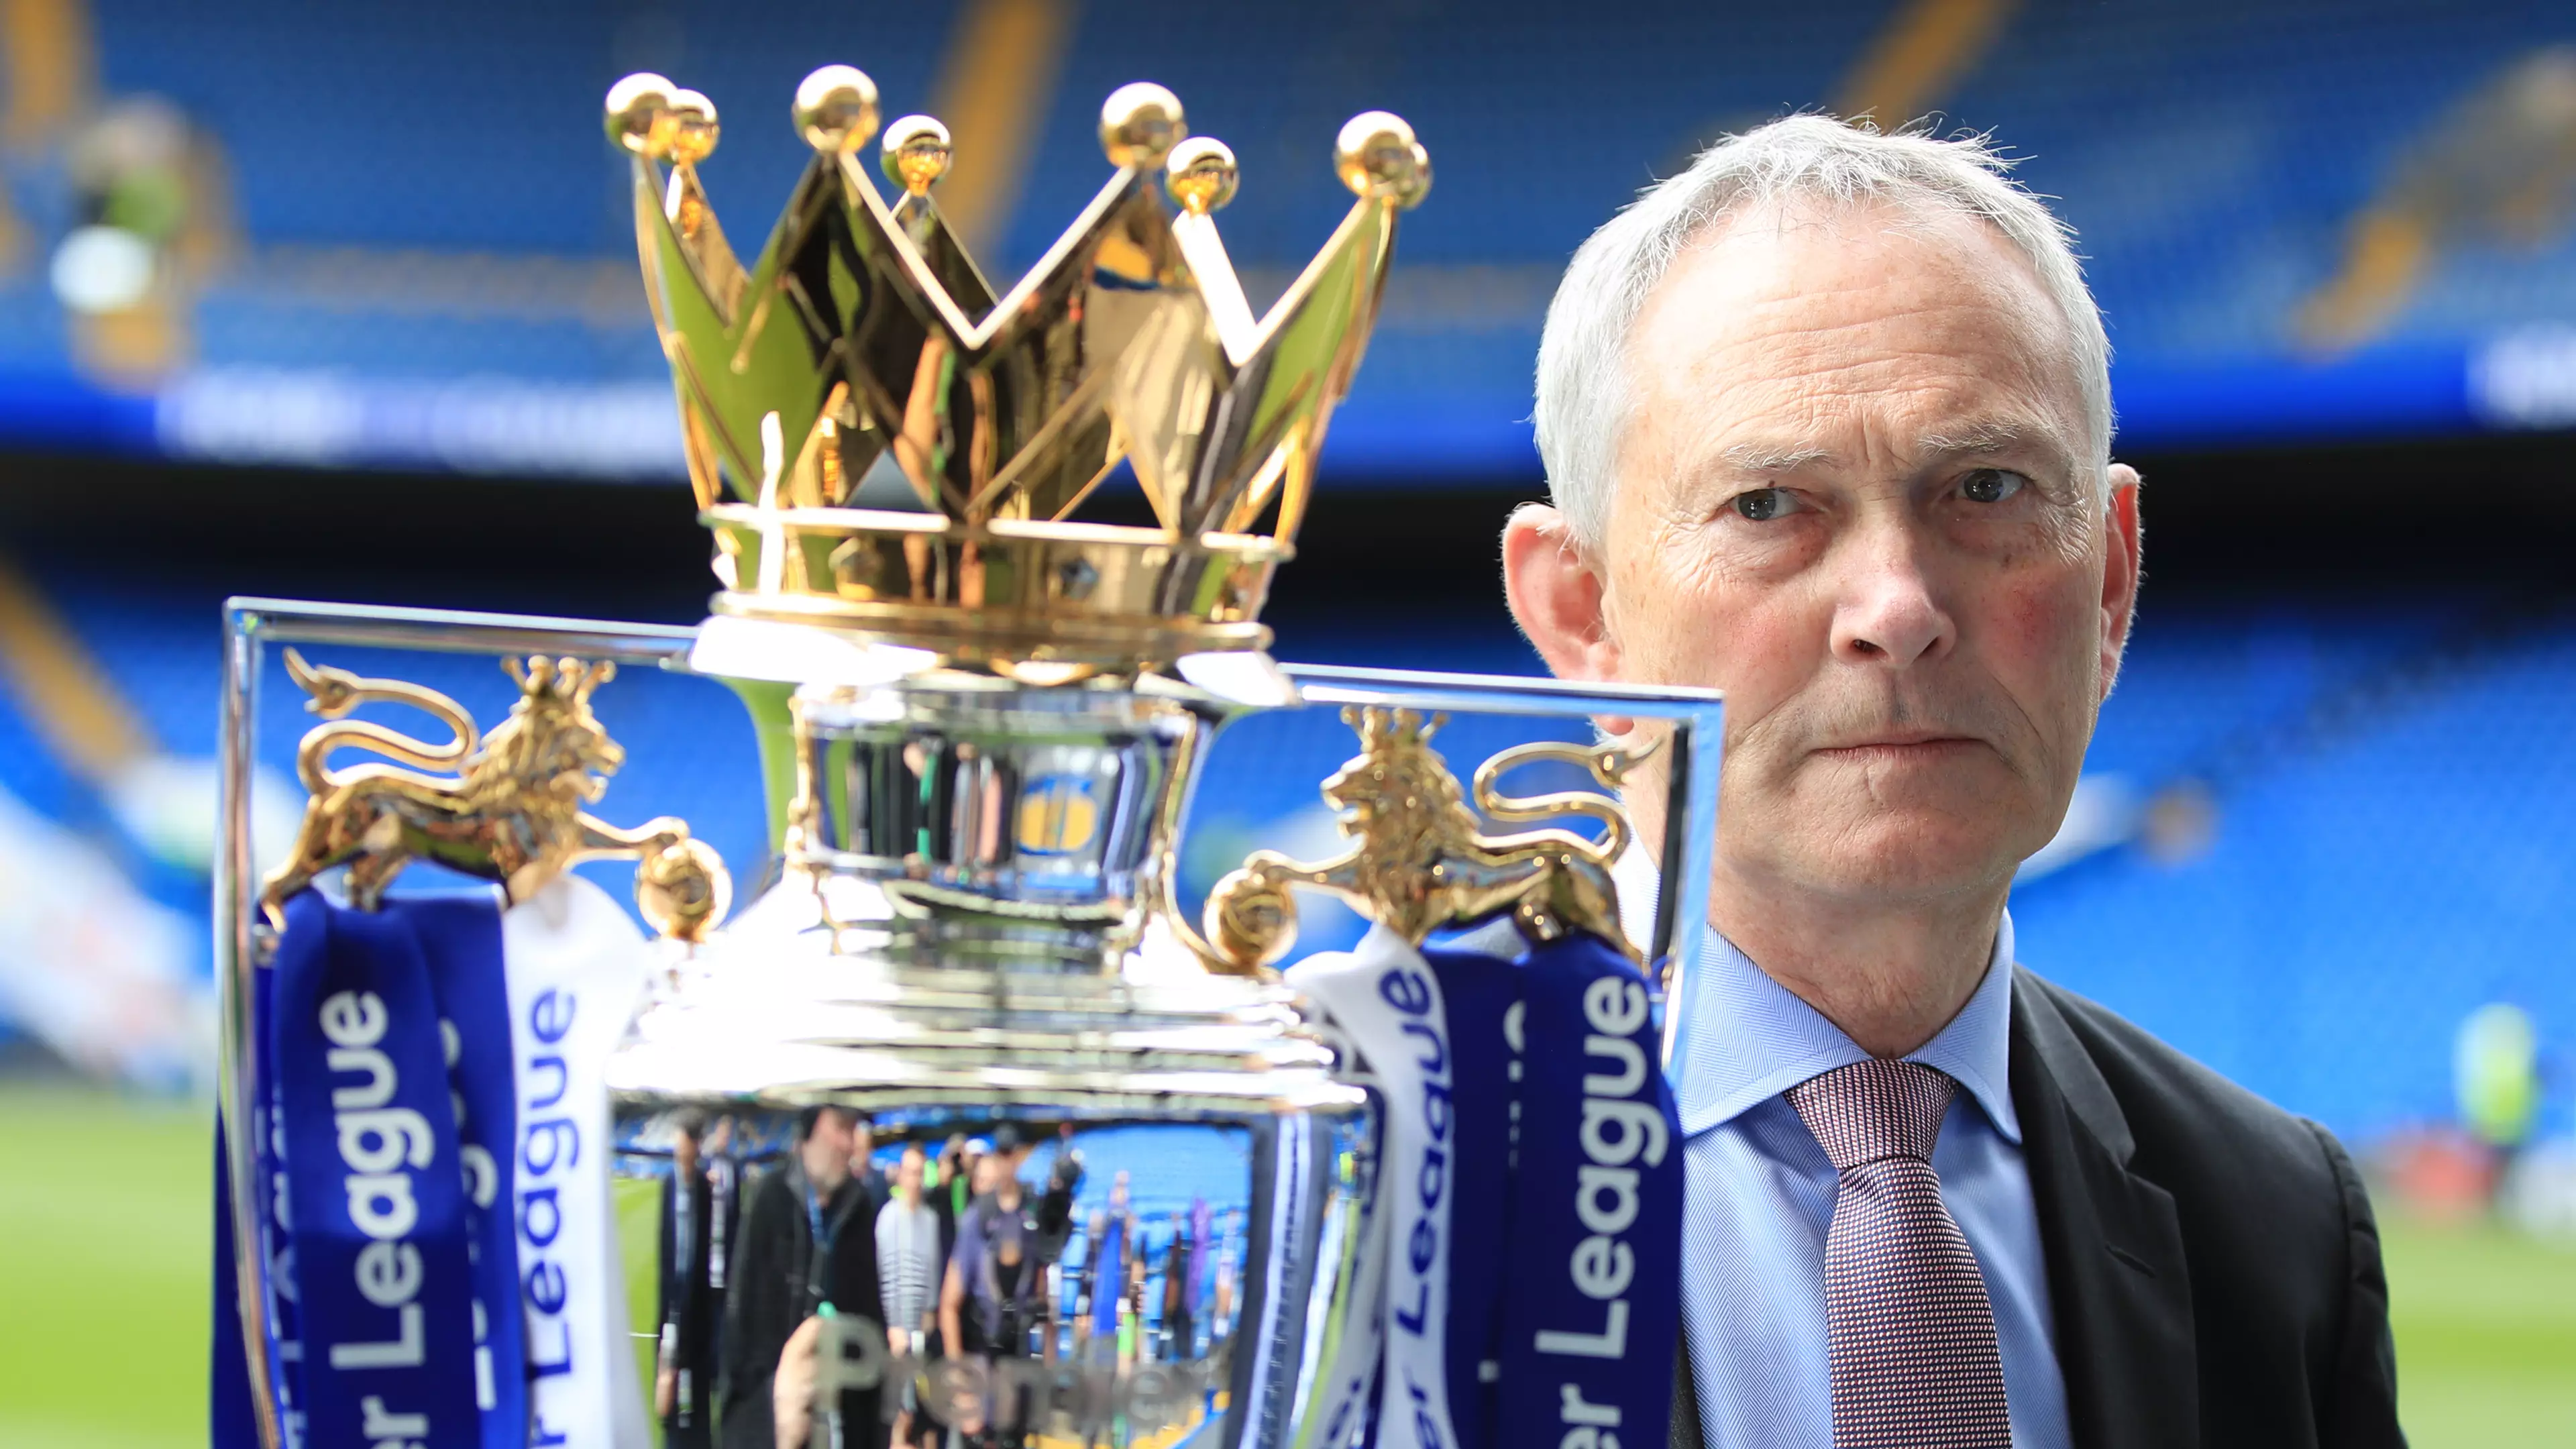 Premier League Clubs All Giving £250k For Richard Scudamore's Leaving Present